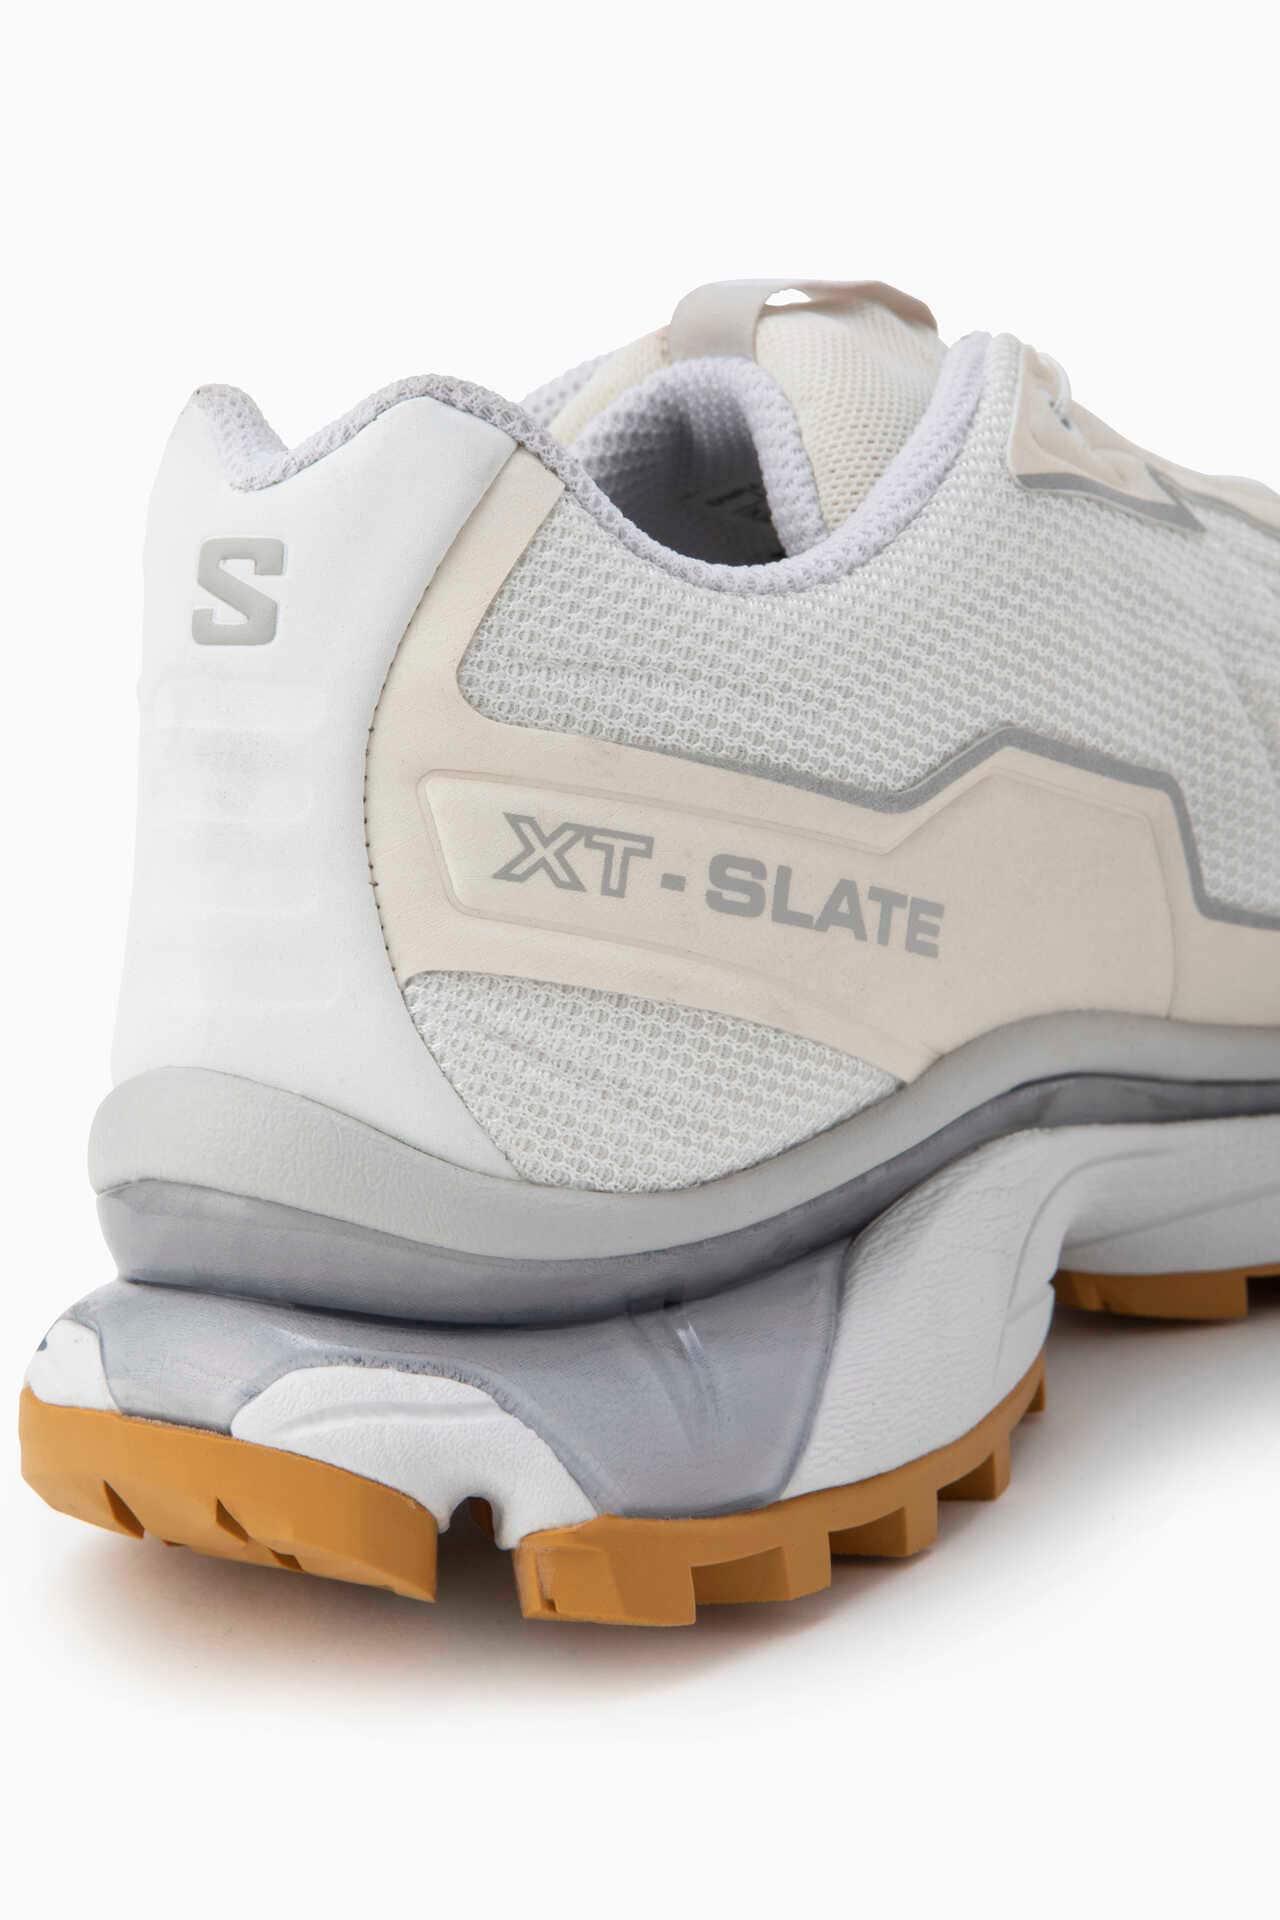 SALOMON XT-SLATE for and wander | and wander ONLINE STORE